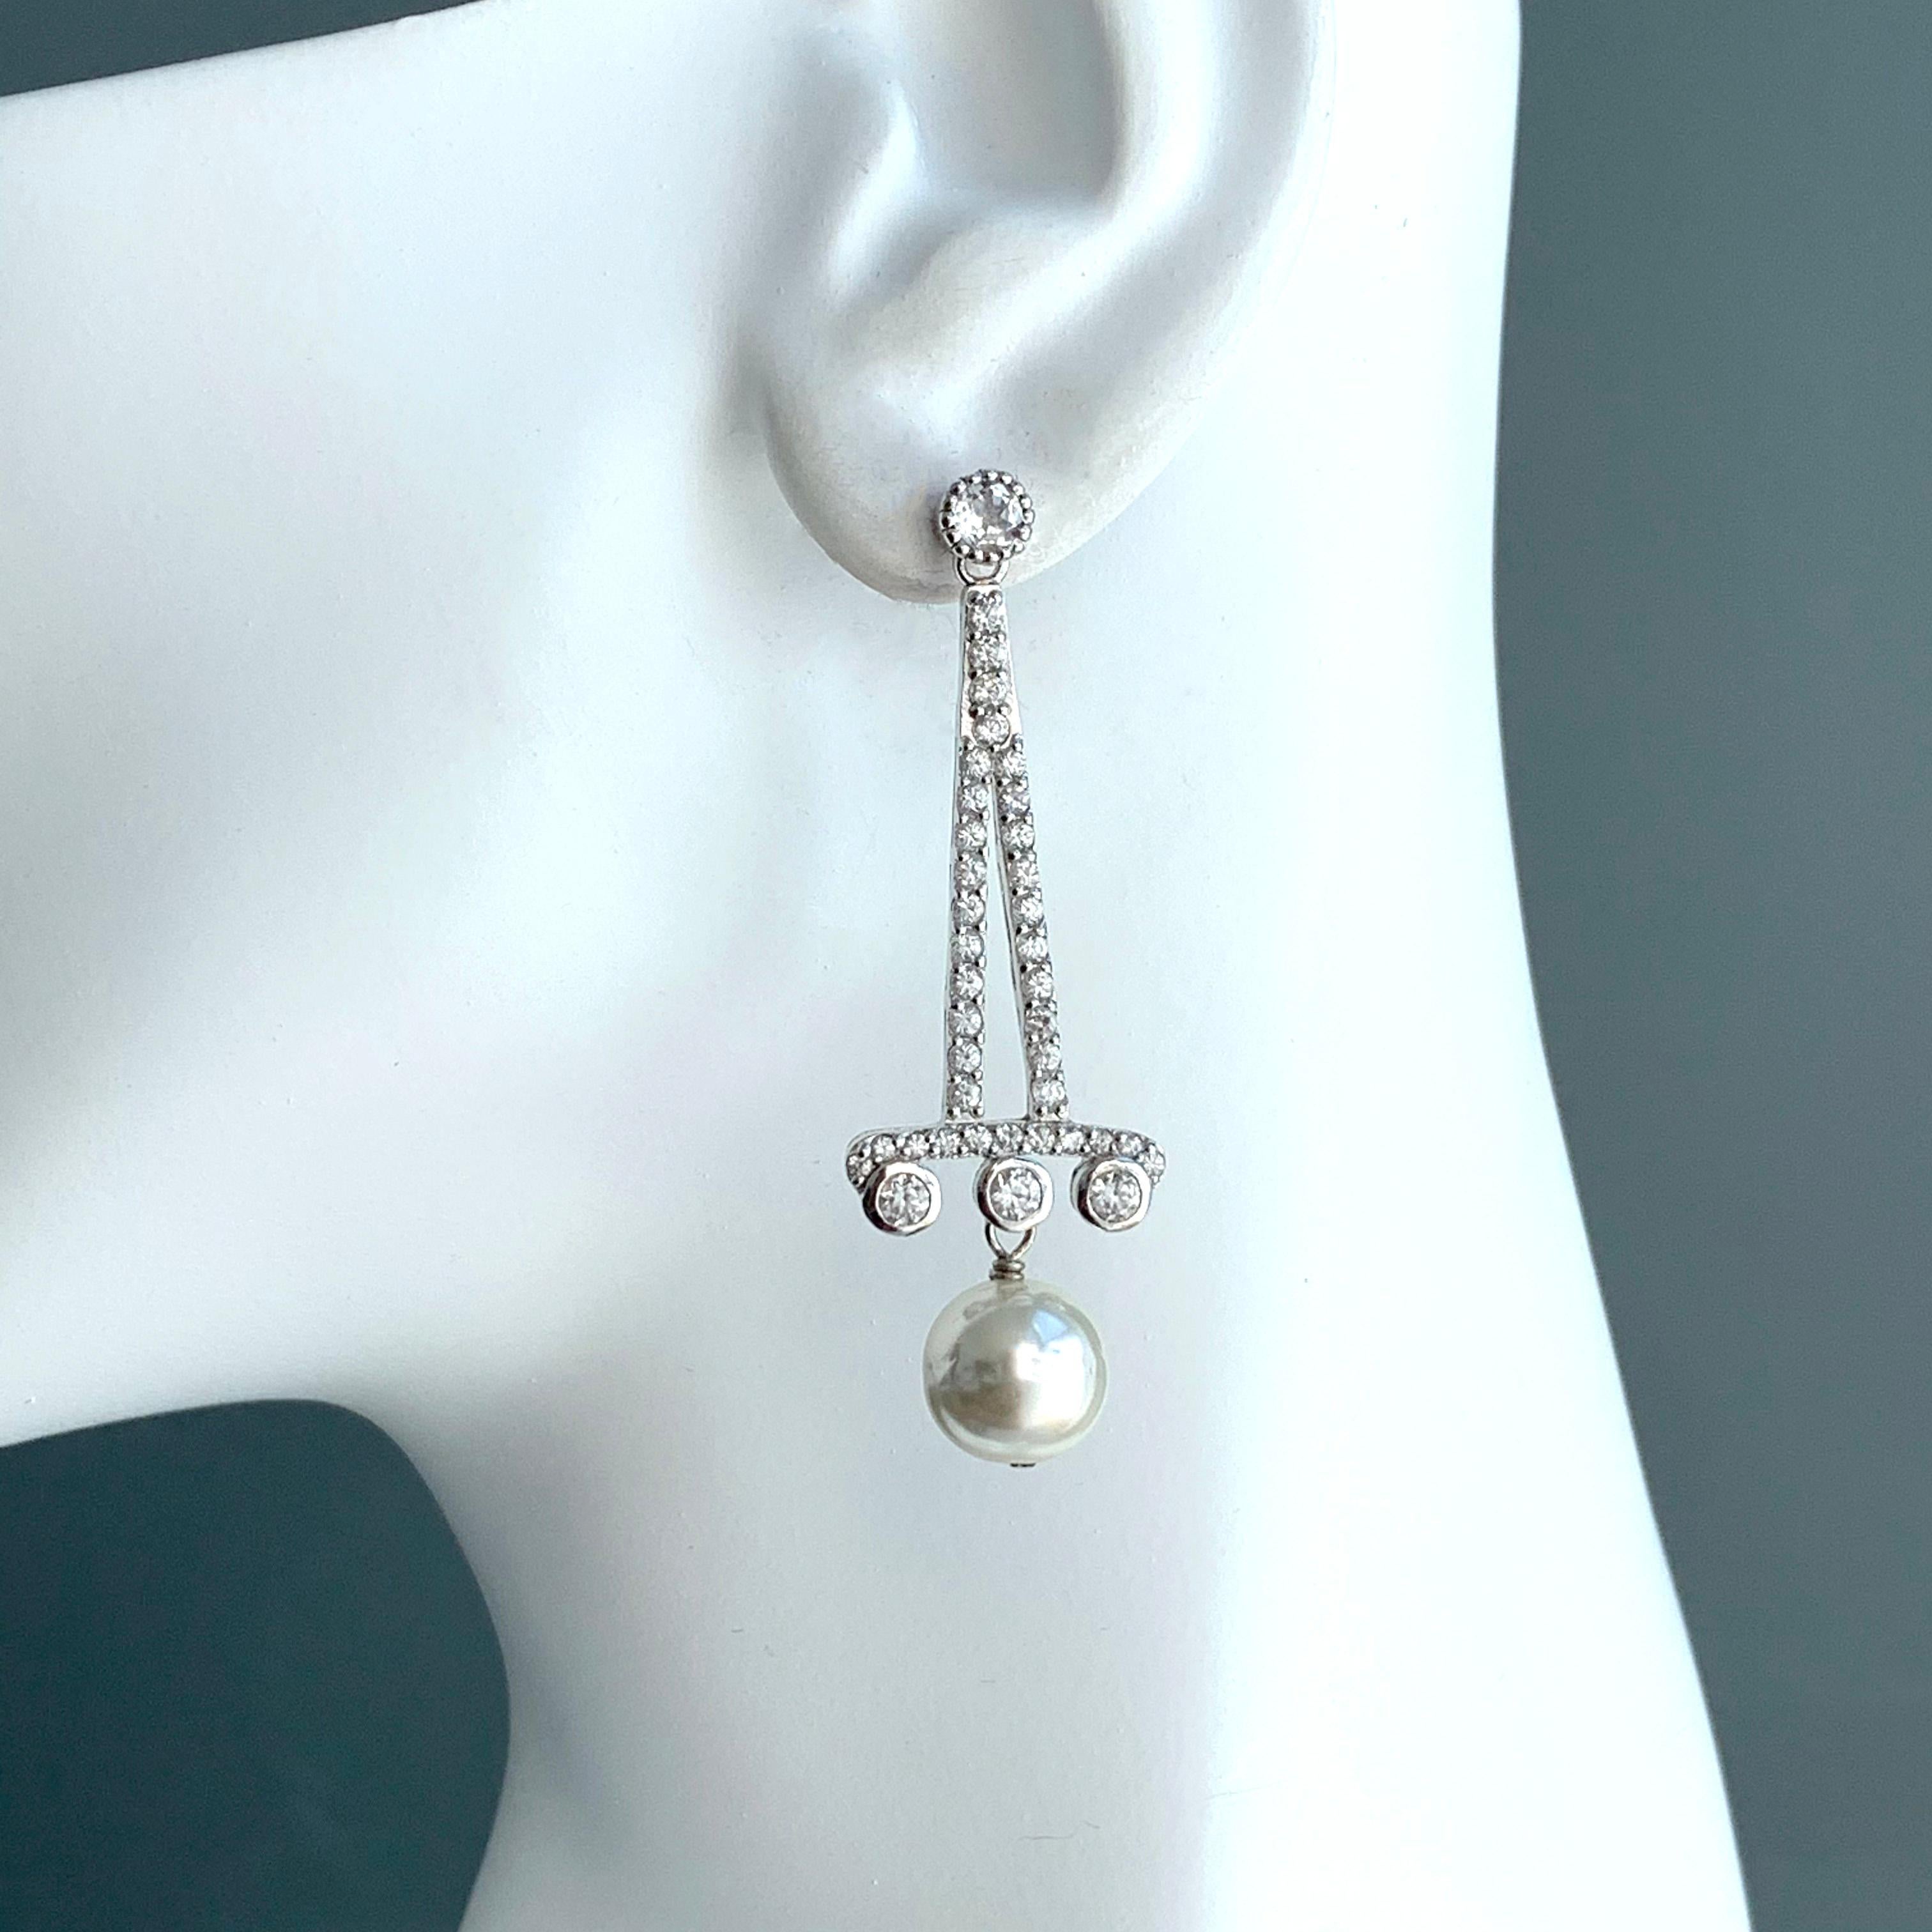 Women's or Men's Stunning Art Deco Style with Glass Pearl Drop Earrings